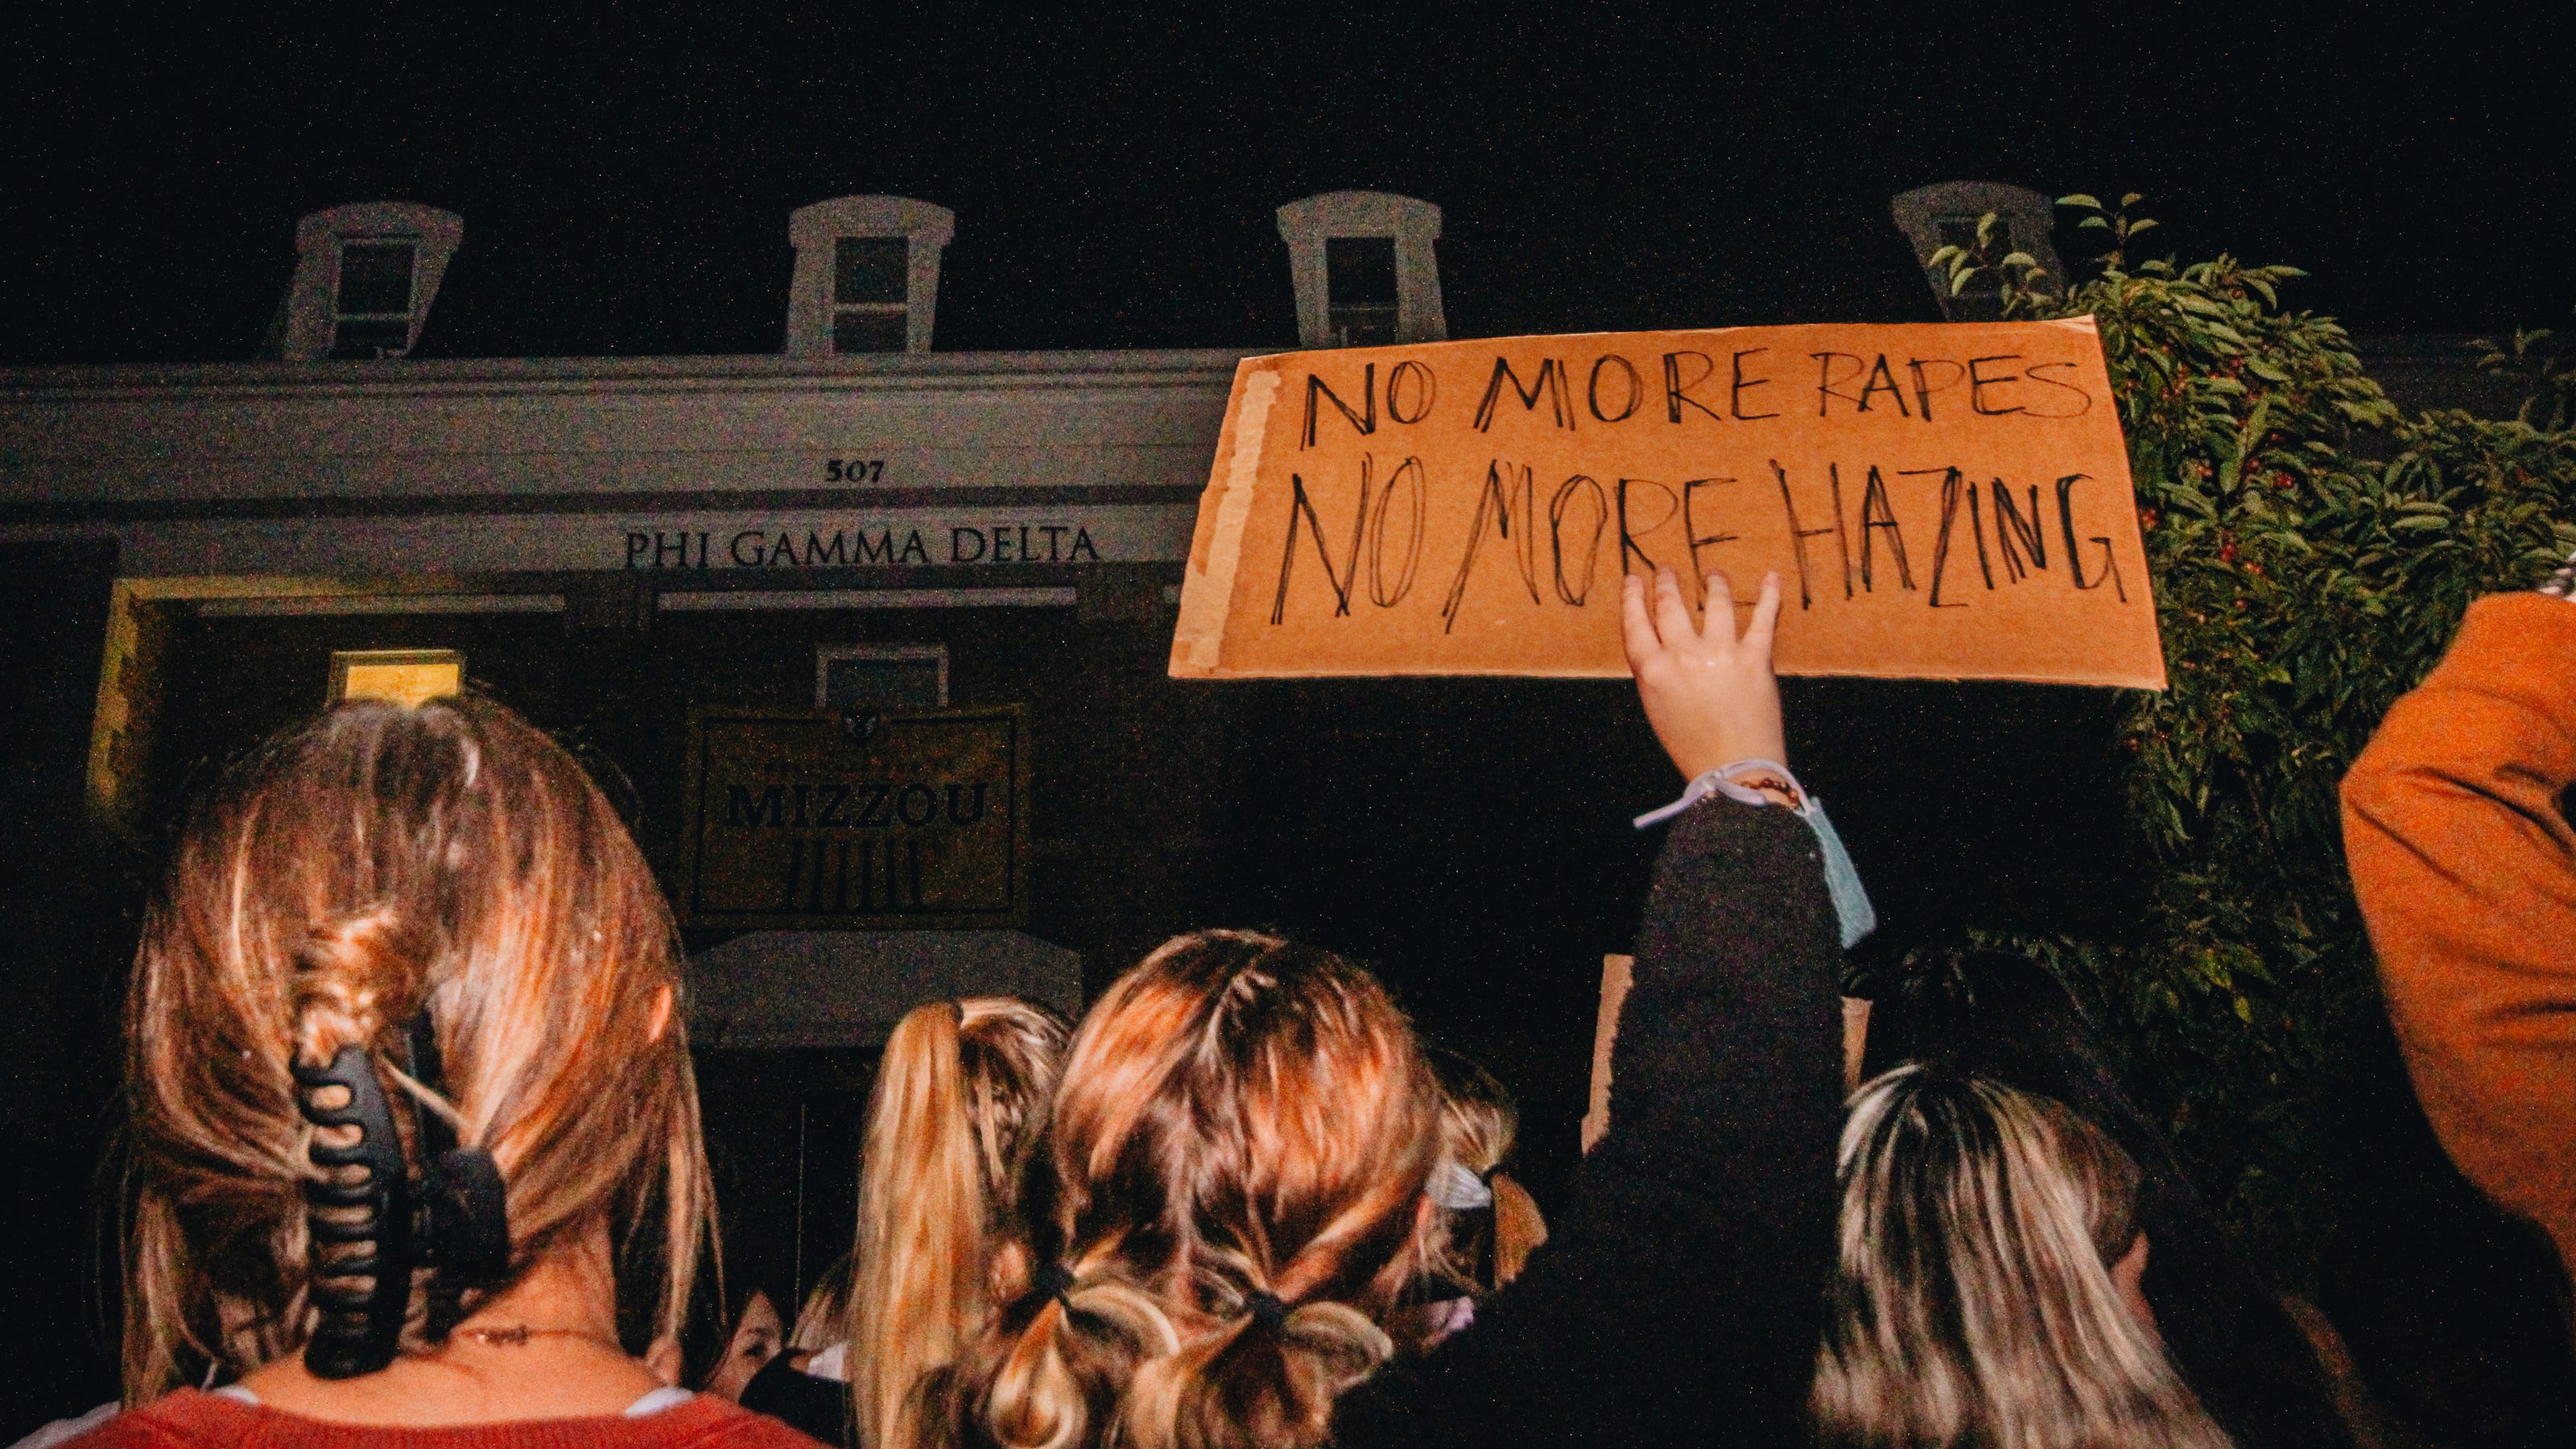 University of Missouri halts all fraternity events after apparent alcohol poisoning